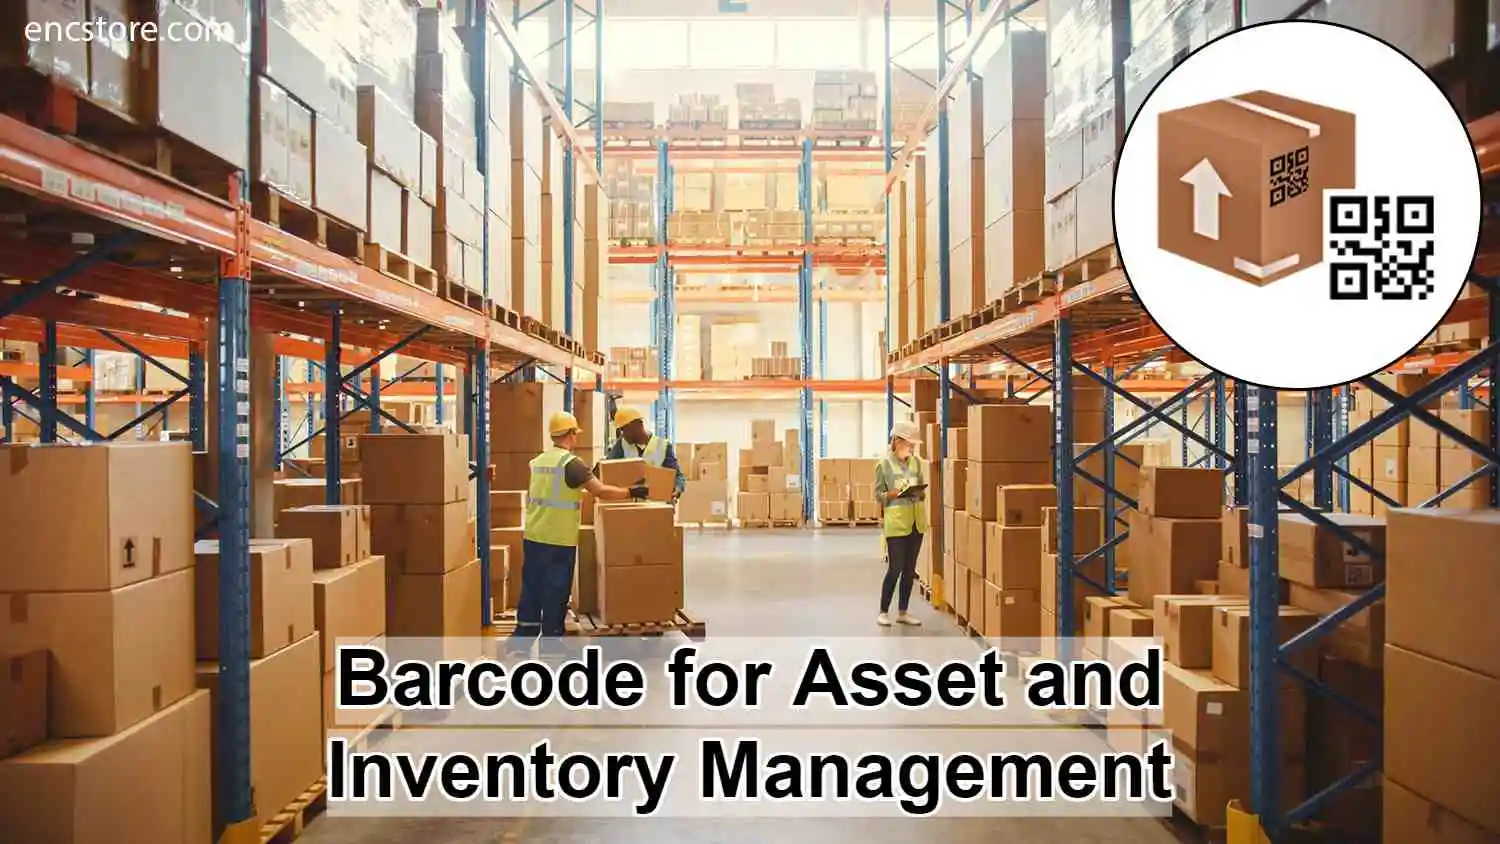 Barcode for Asset and Inventory Management